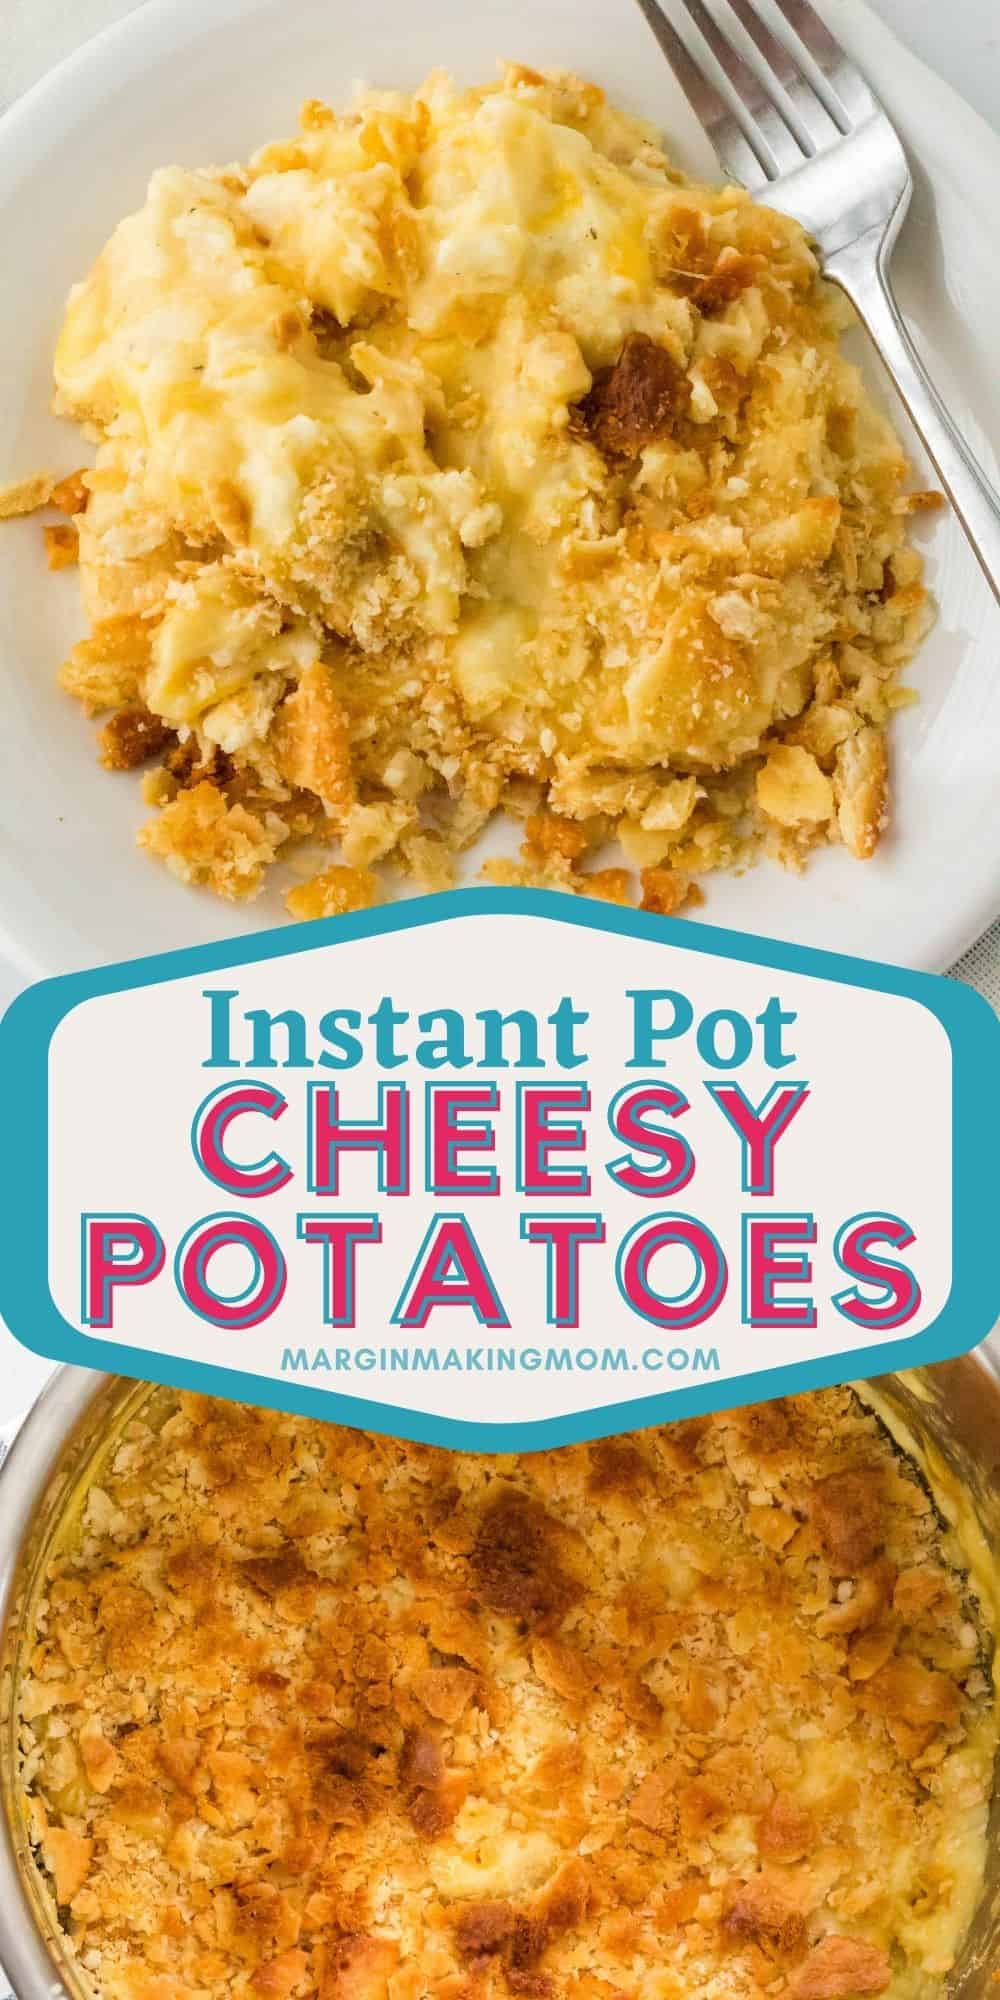 collage image featuring two photos of Instant Pot cheesy potatoes, one in the insert pot and one served on a white plate